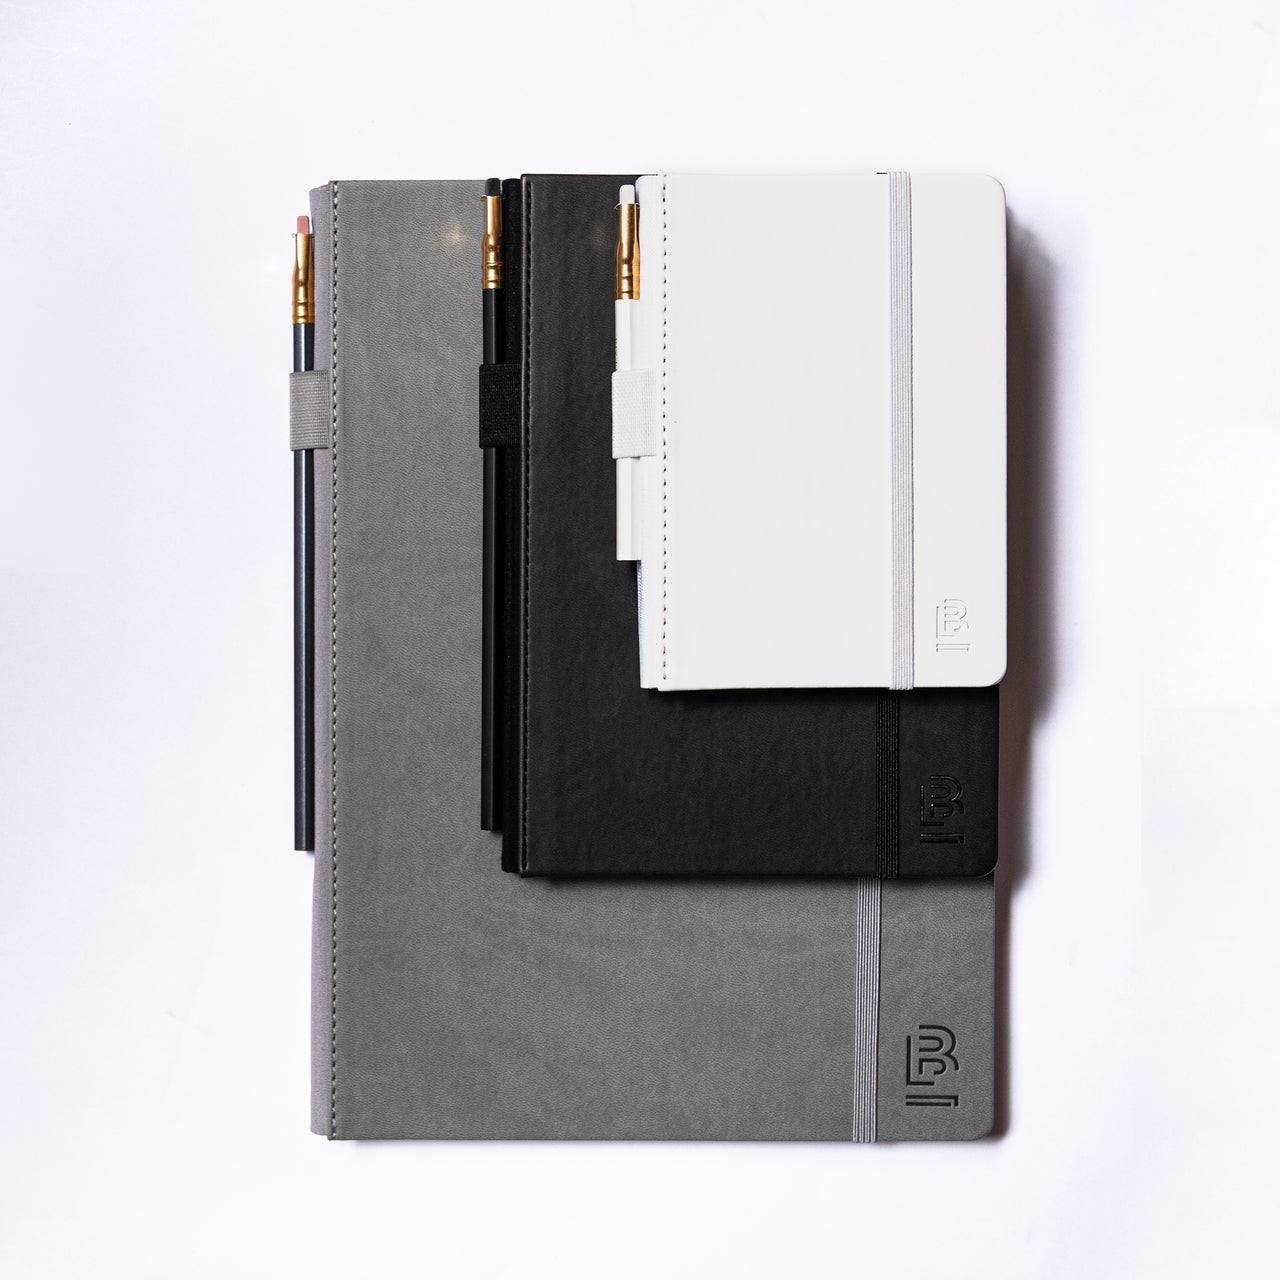 The A5, medium size notebook measures 5 3/4 by 8 3/8 inches (148x210 mm). 

